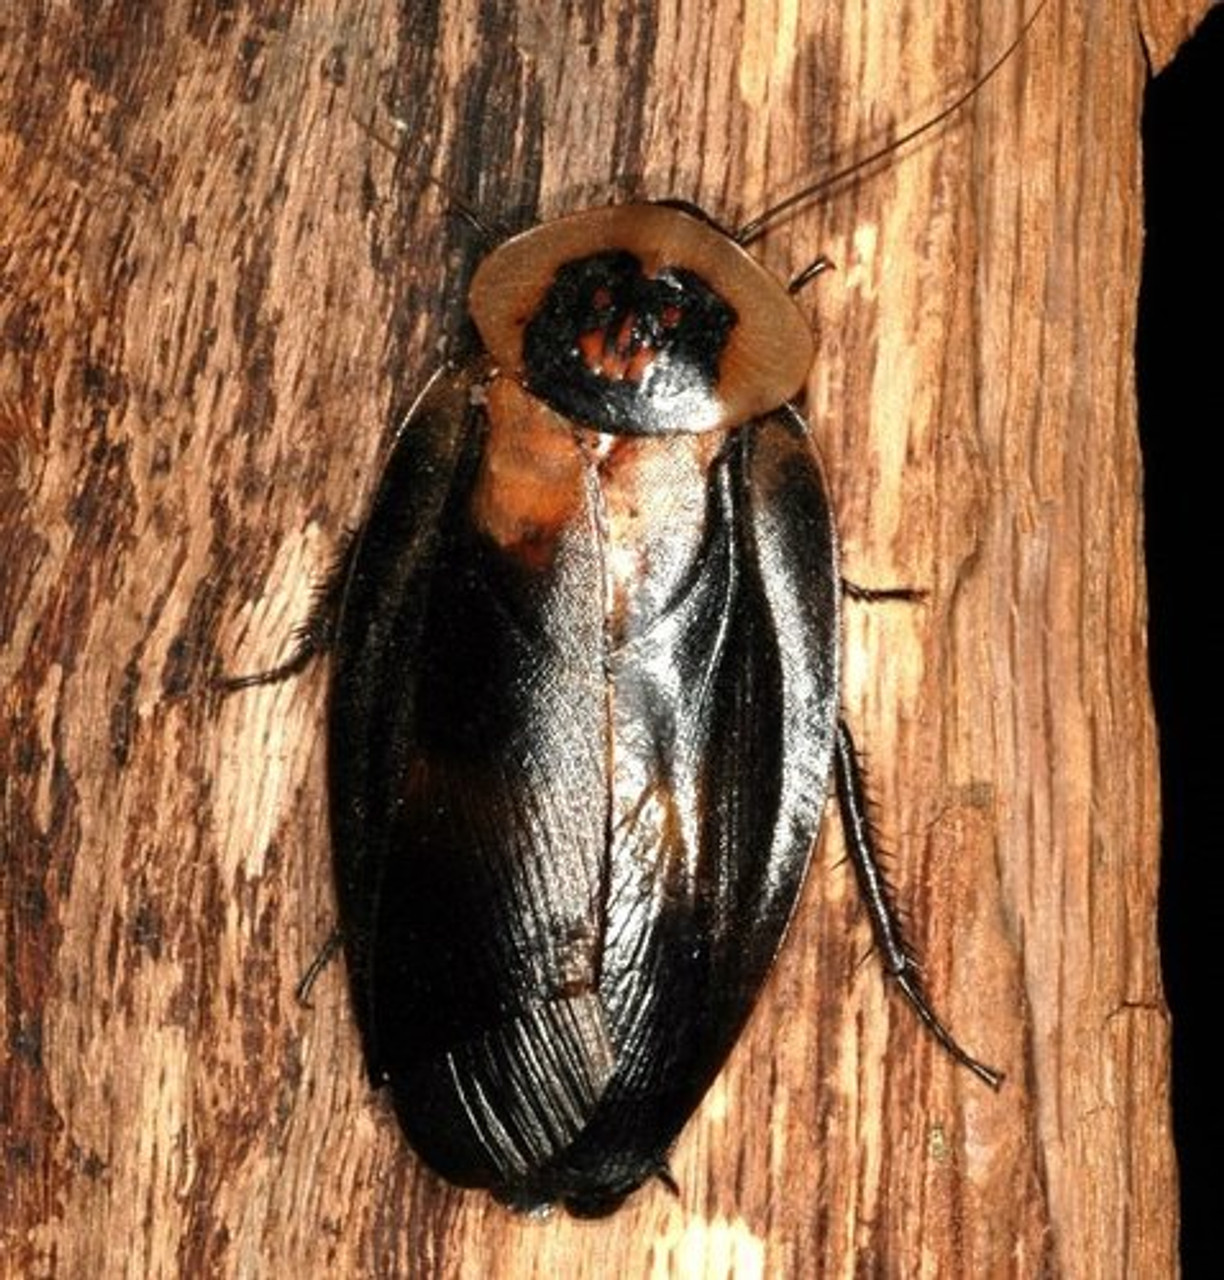 The adult Death Head Roach has a marking that looks like a  jack o' lantern's face on a black cat-shaped head